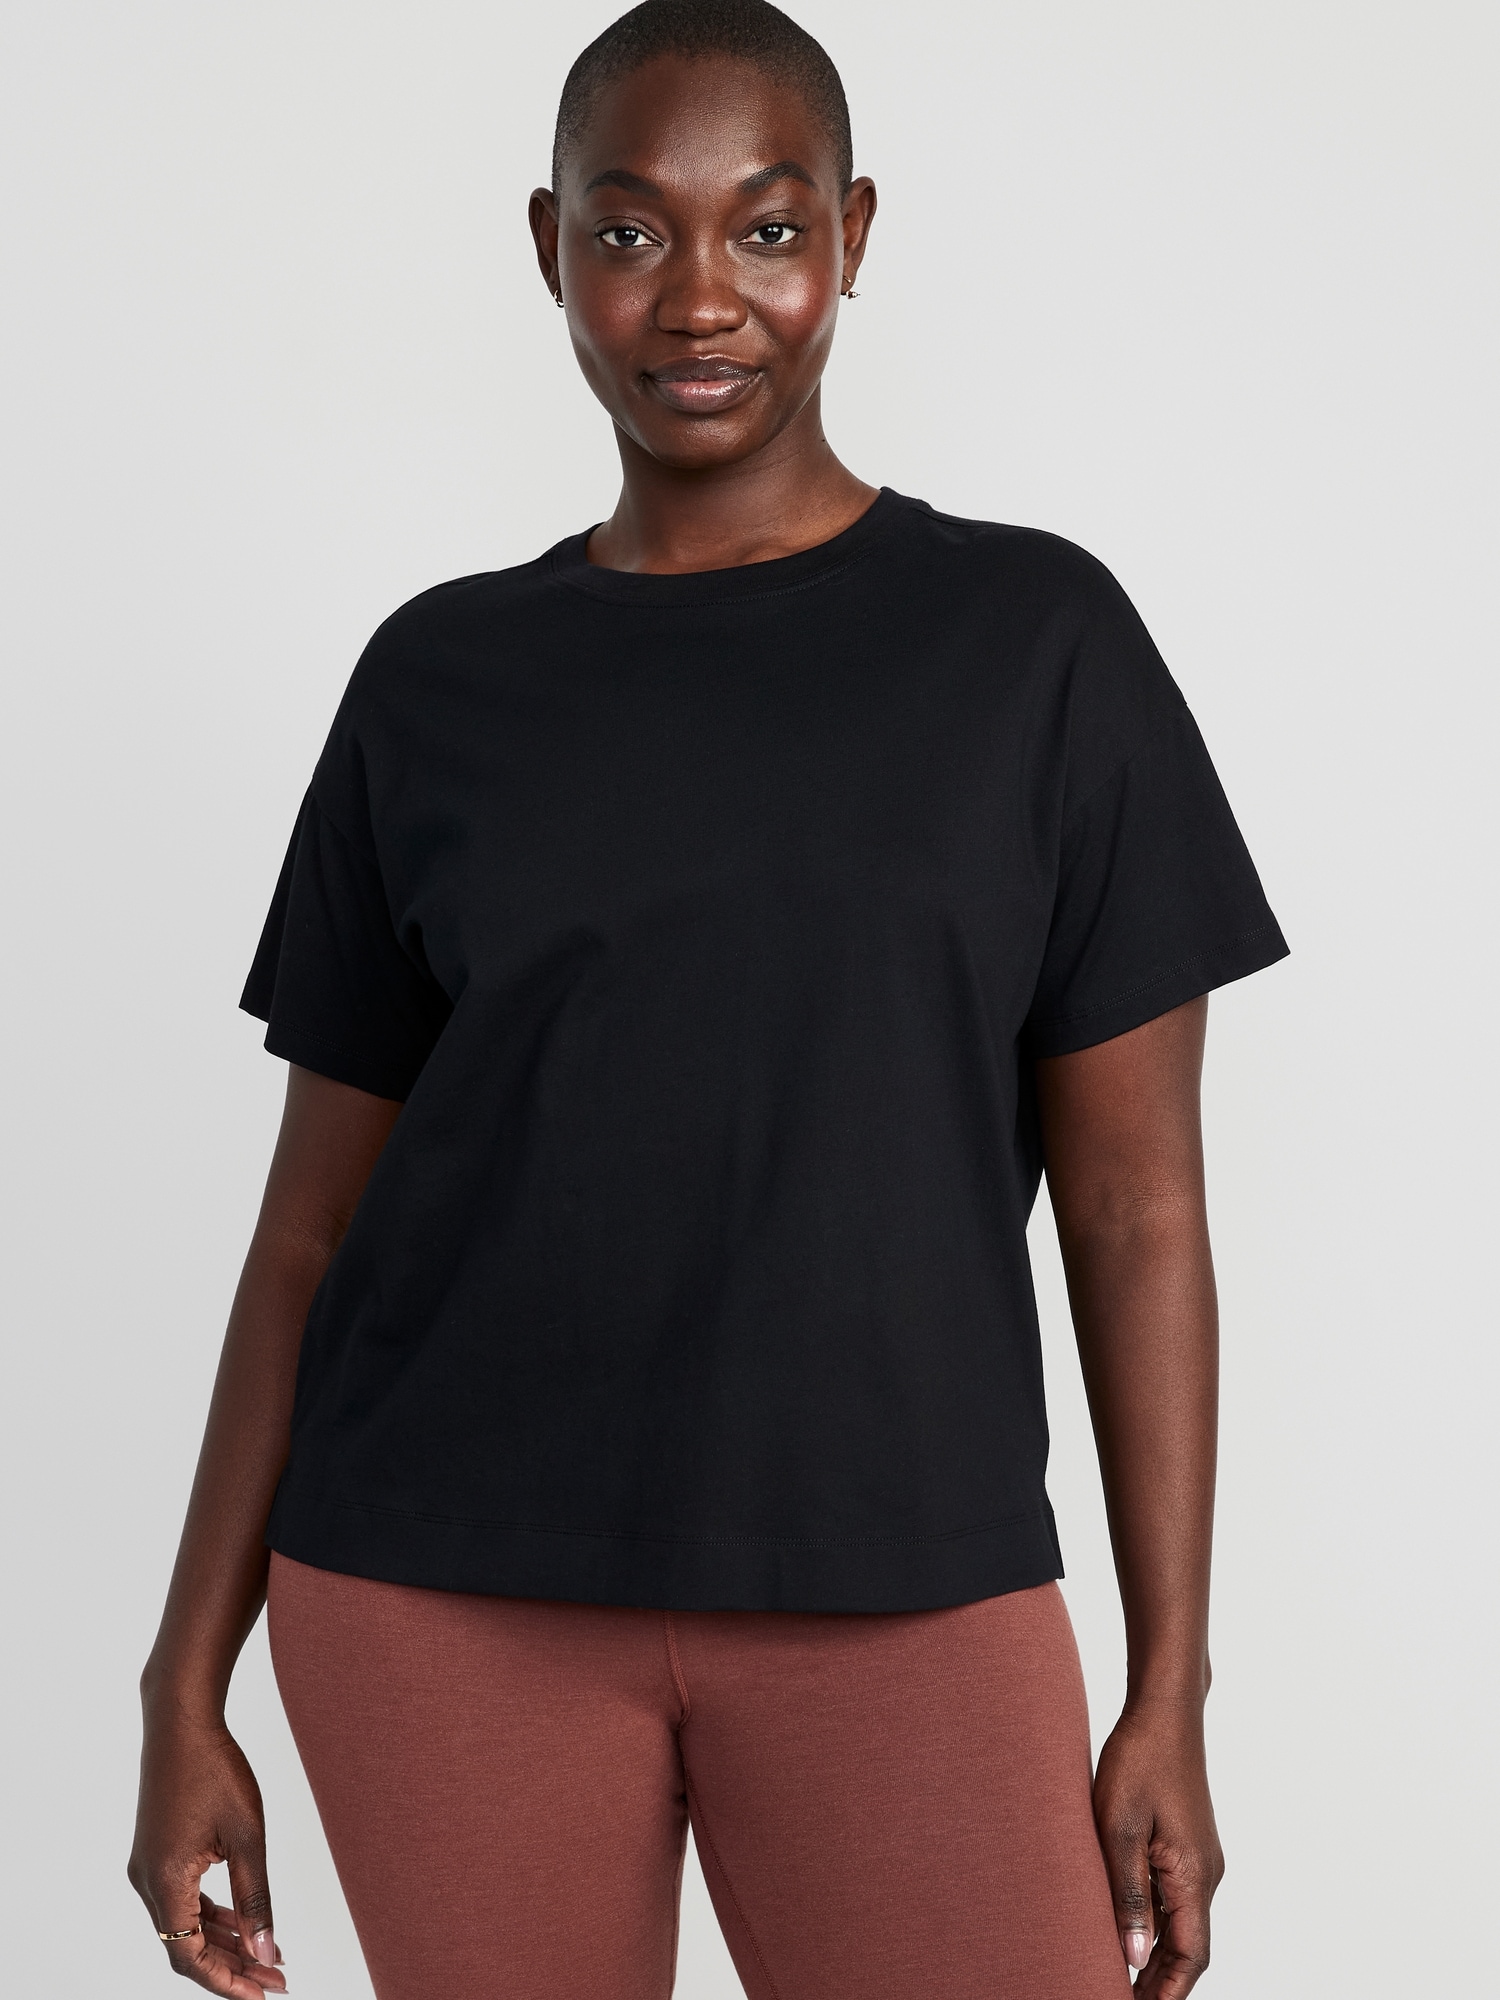 Vintage T-Shirt for Women | Old Navy